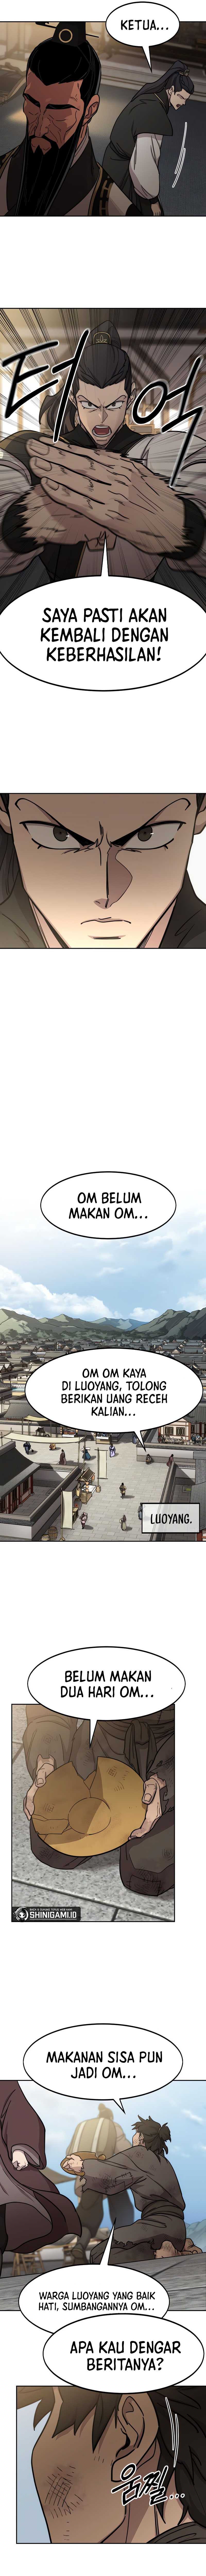 Return of the Flowery Mountain Sect Chapter 86